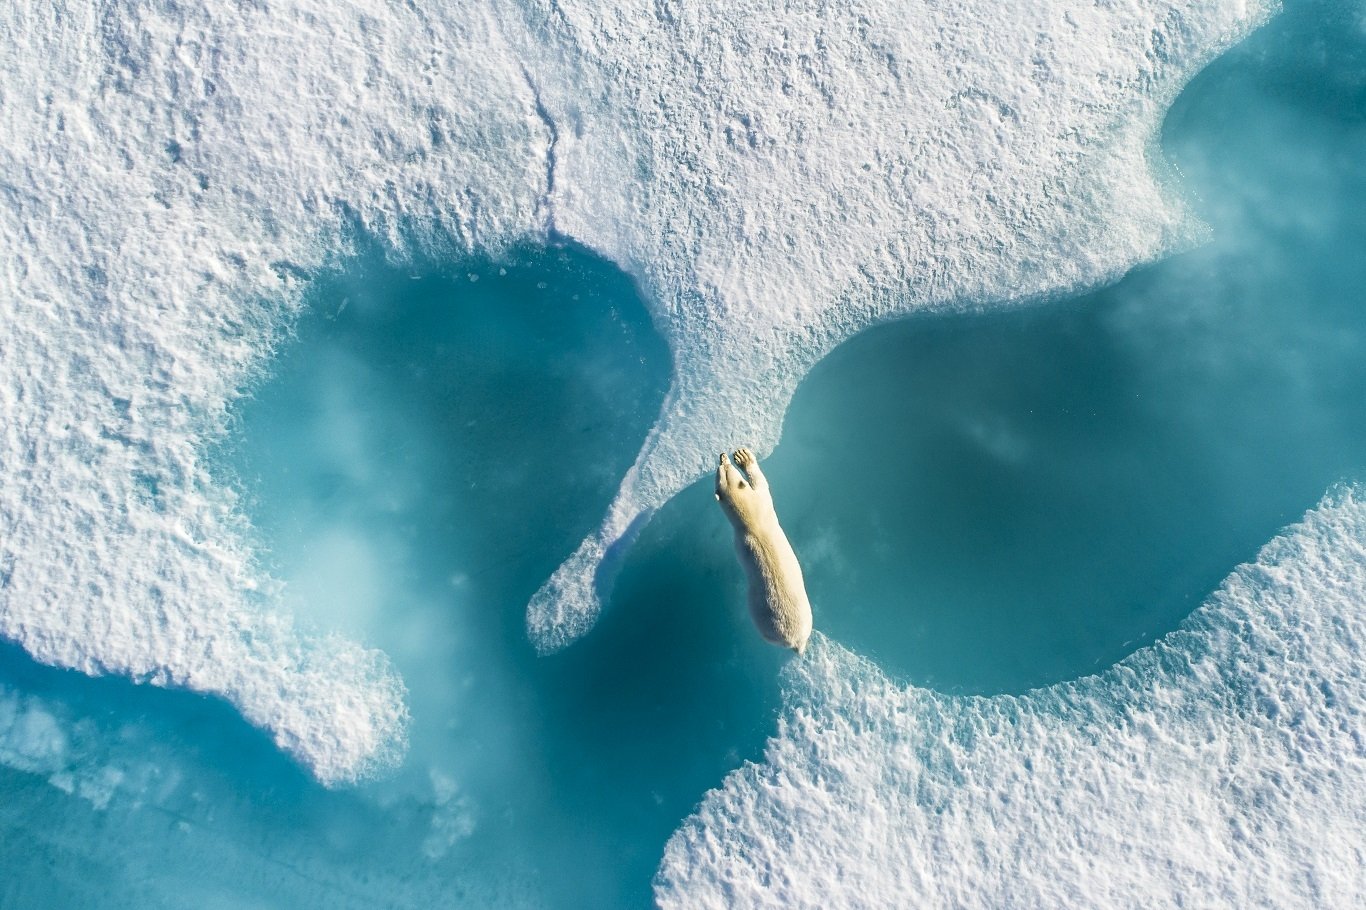 A photo shows a polar bear leaping the ice during summer around Baffin Island, in Canada, Nunavut, North America.

